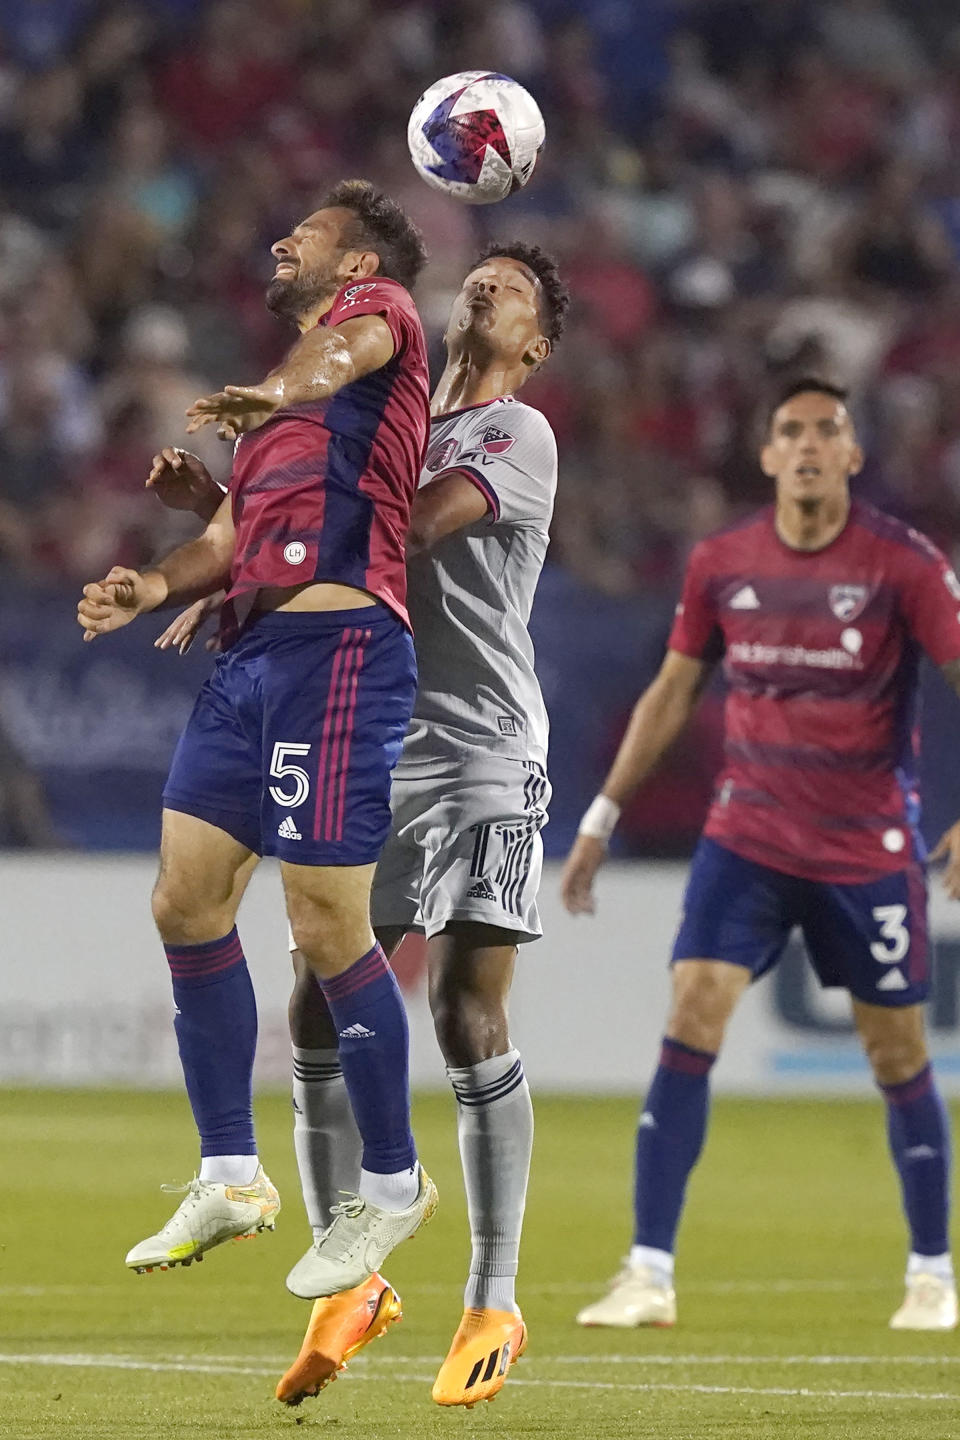 FC Dallas midfielder Facundo Quignon (5) and Sporting Kansas City forward Khiry Shelton (11) jump for the header during the first half of an MLS soccer match Saturday, May 6, 2023, in Frisco, Texas. (AP Photo/LM Otero)